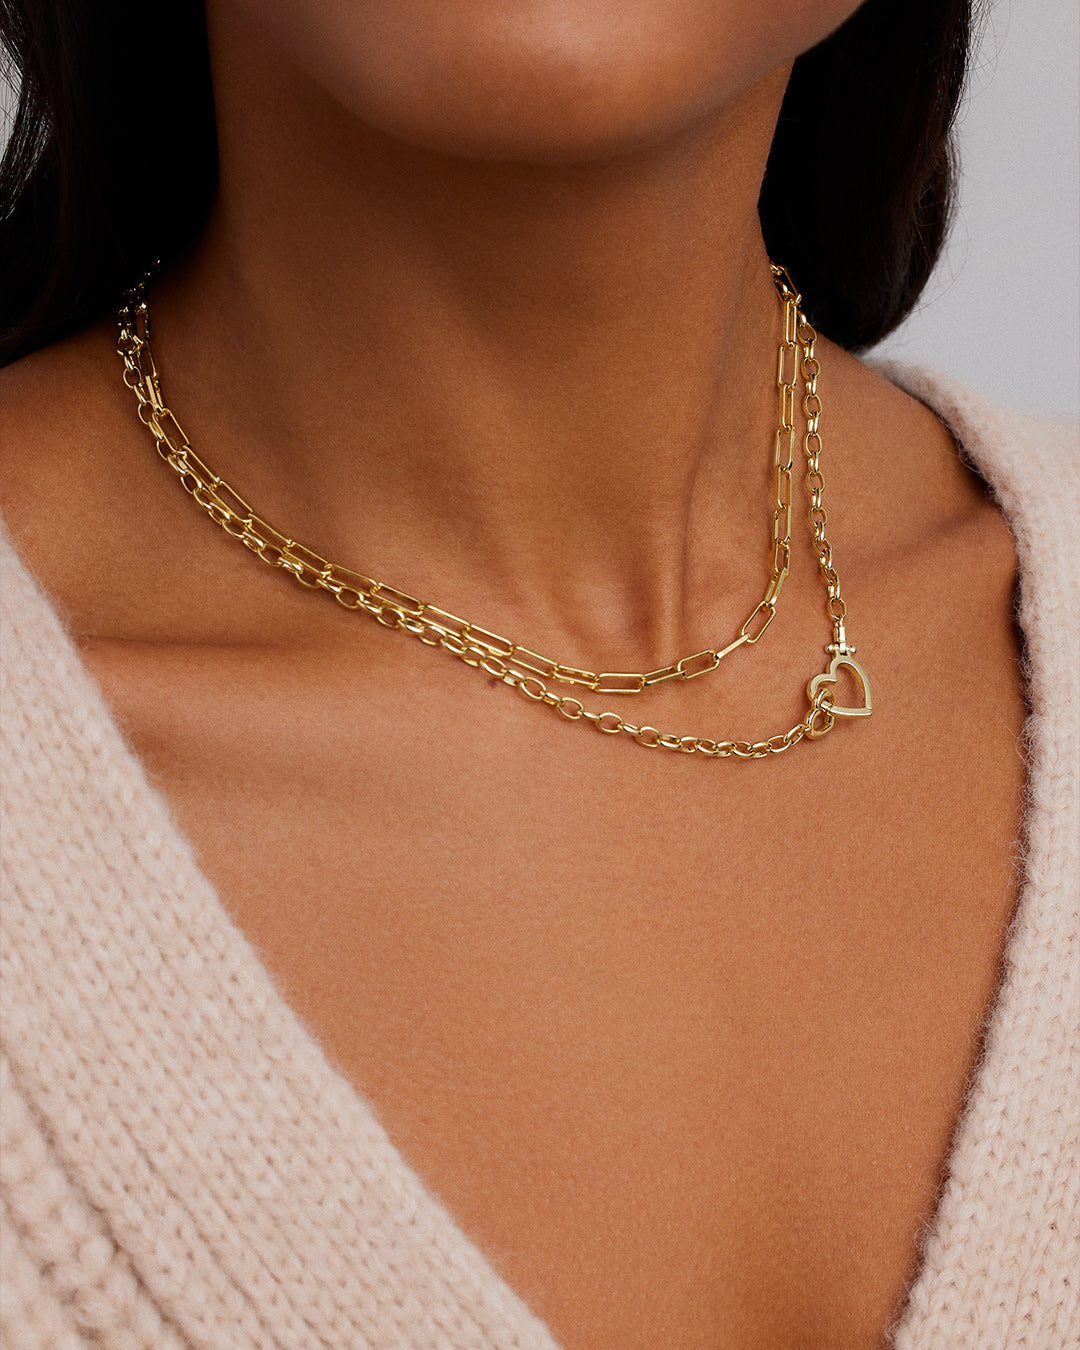 Chain Necklaces, Gold & Silver Necklaces